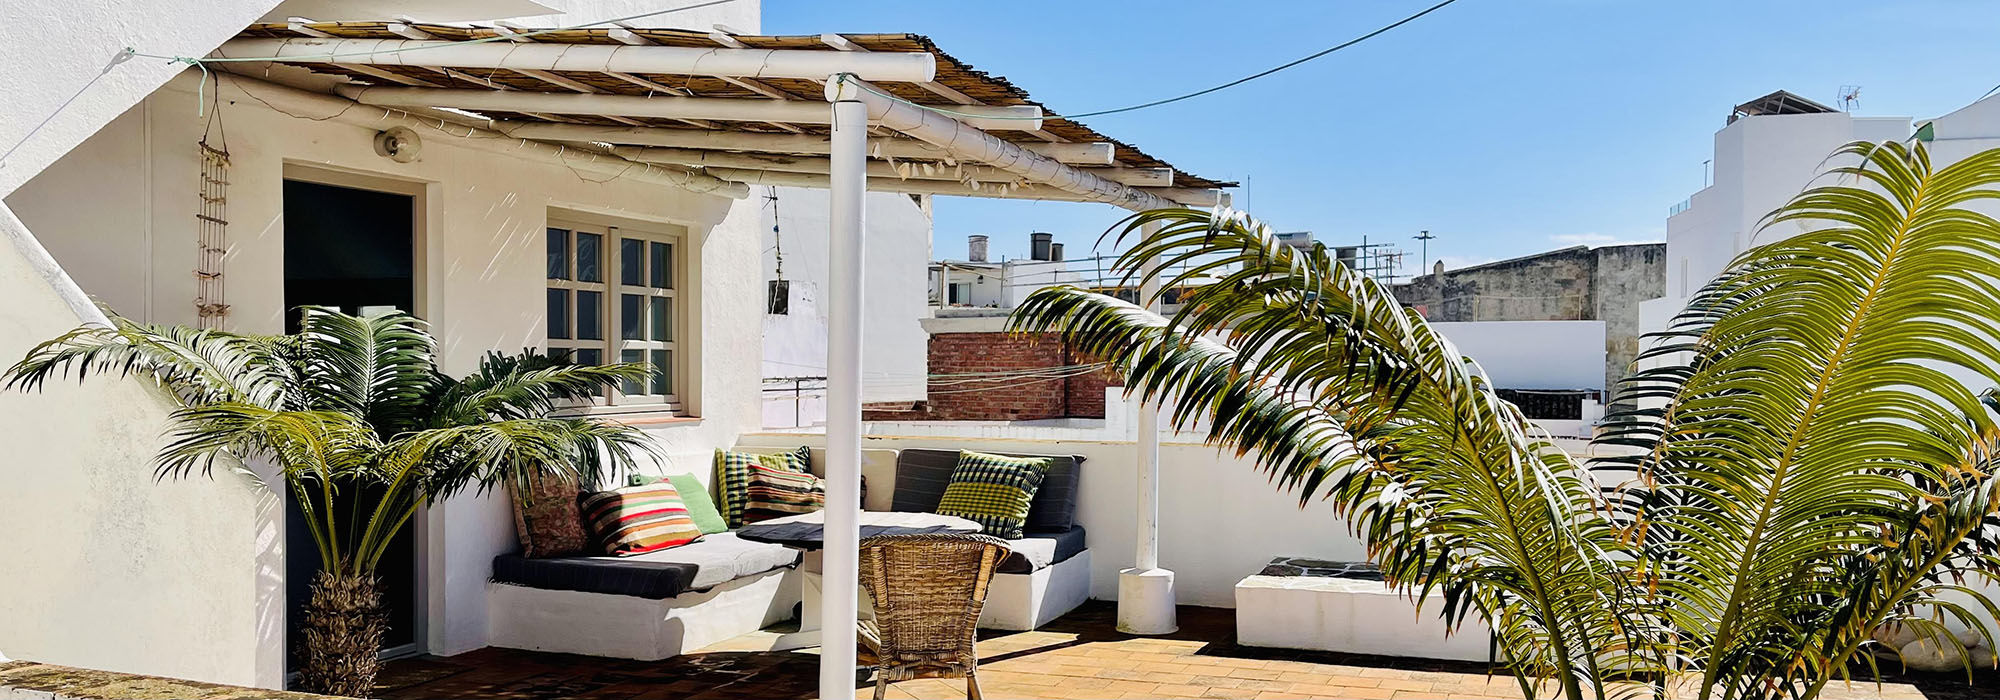 Charming house in the old town of Tarifa